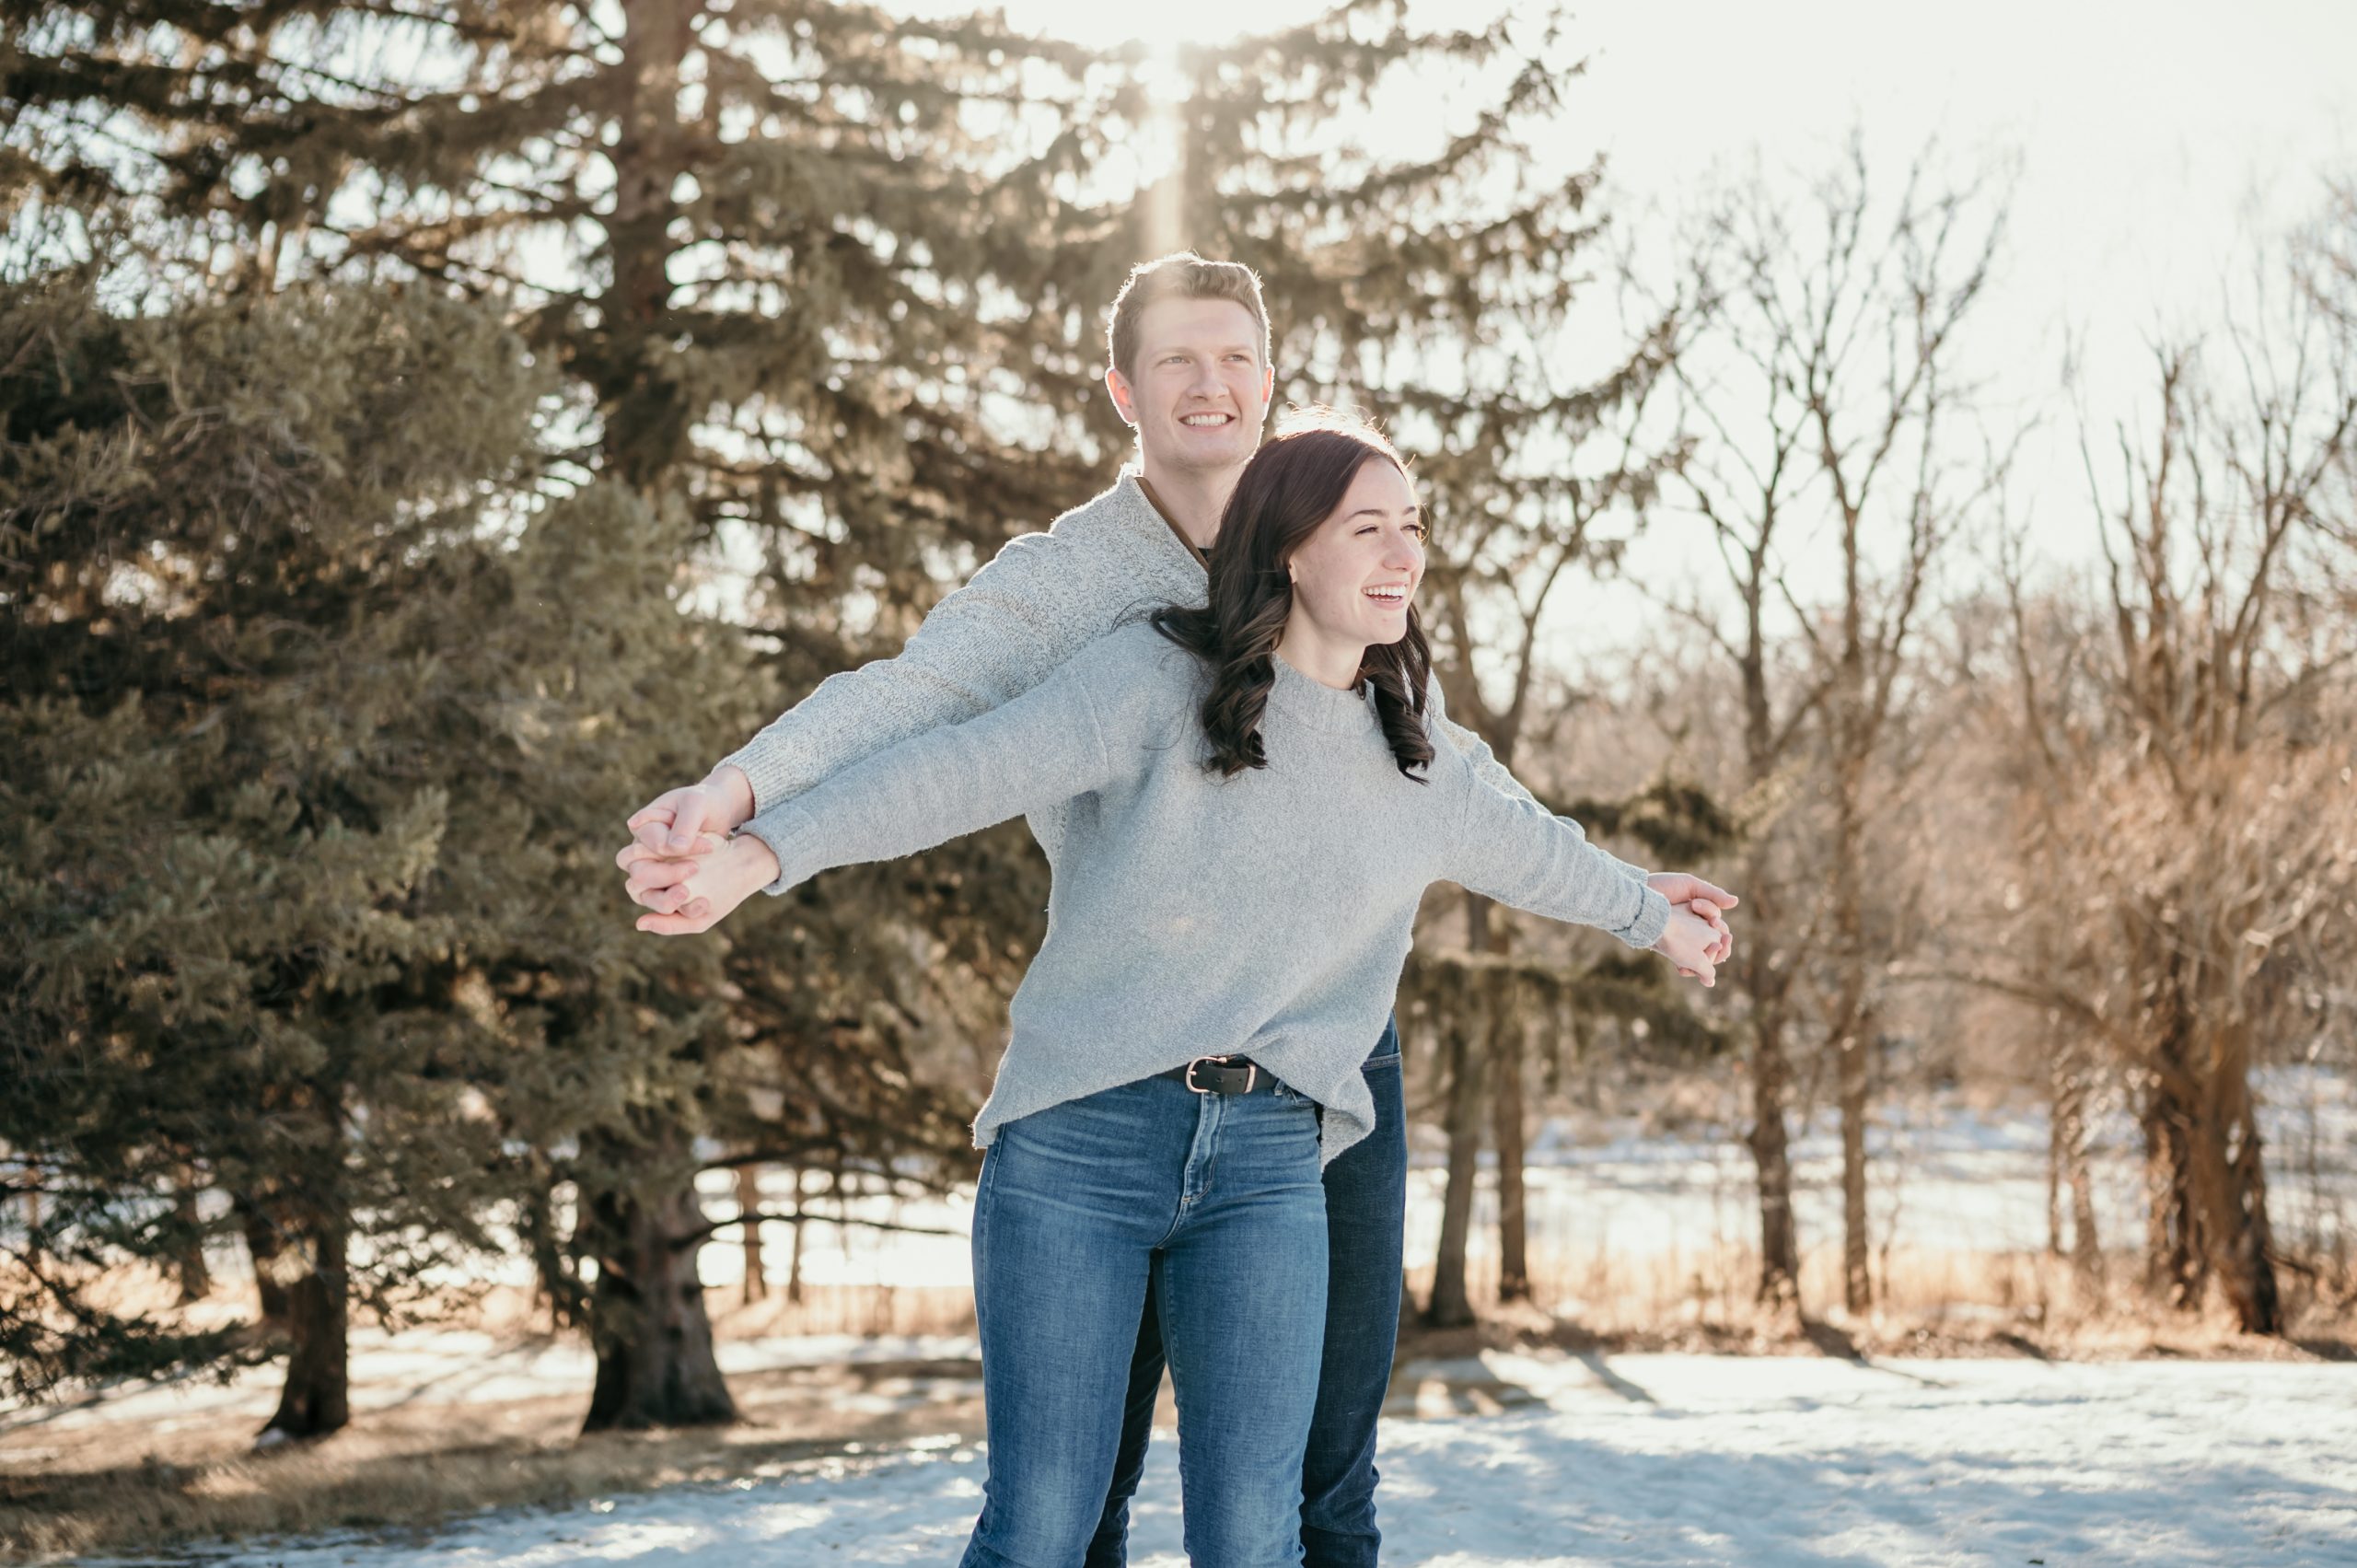 Airplane hands pose during an engagement photo session